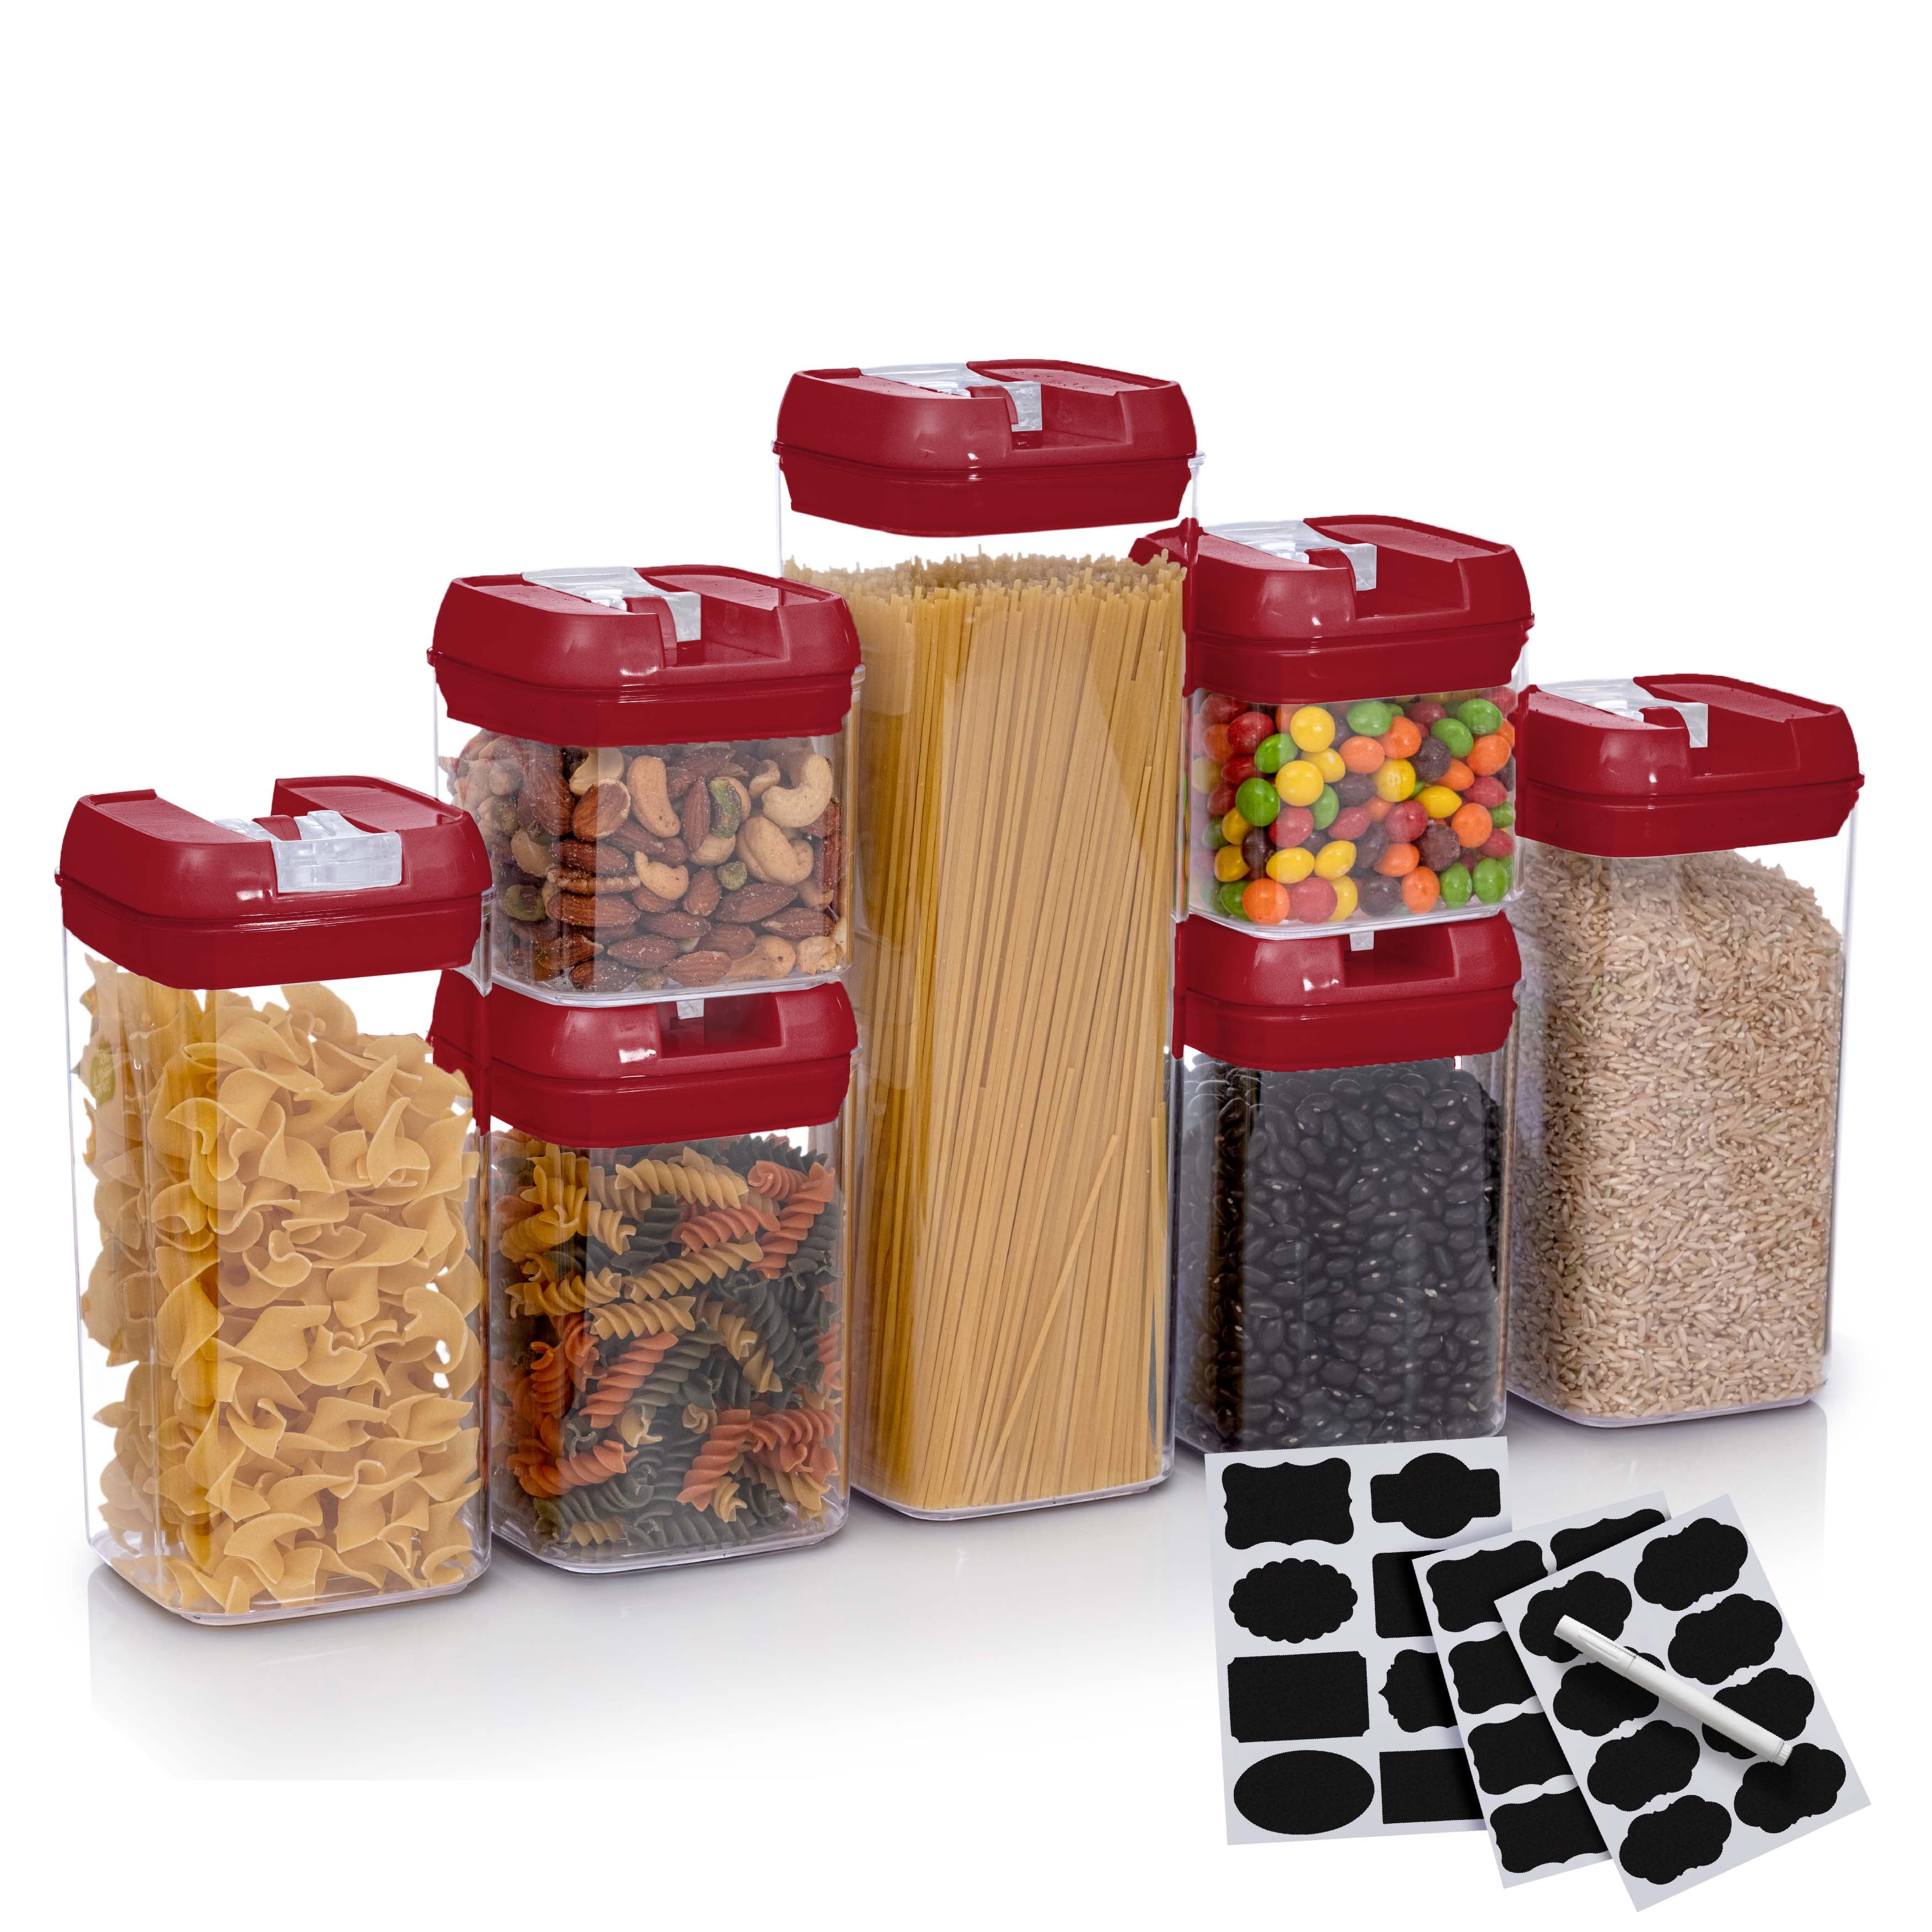 Cheer Collection Set of 24 Airtight Food Storage Containers - Clear